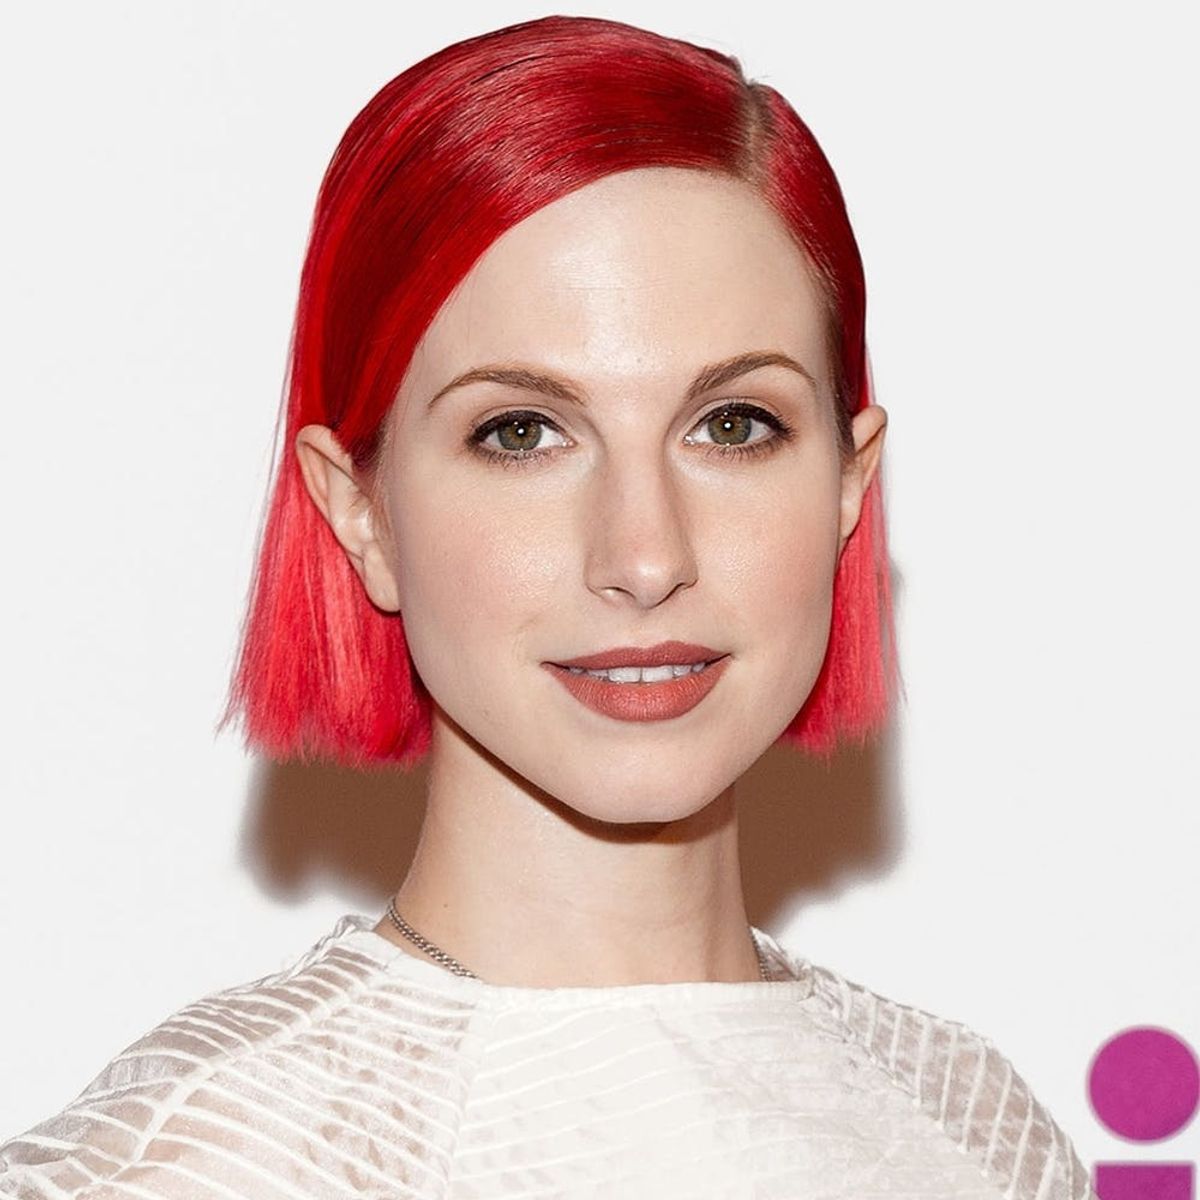 Paramore’s Hayley Williams Is Launching Her Own Hair Color Line